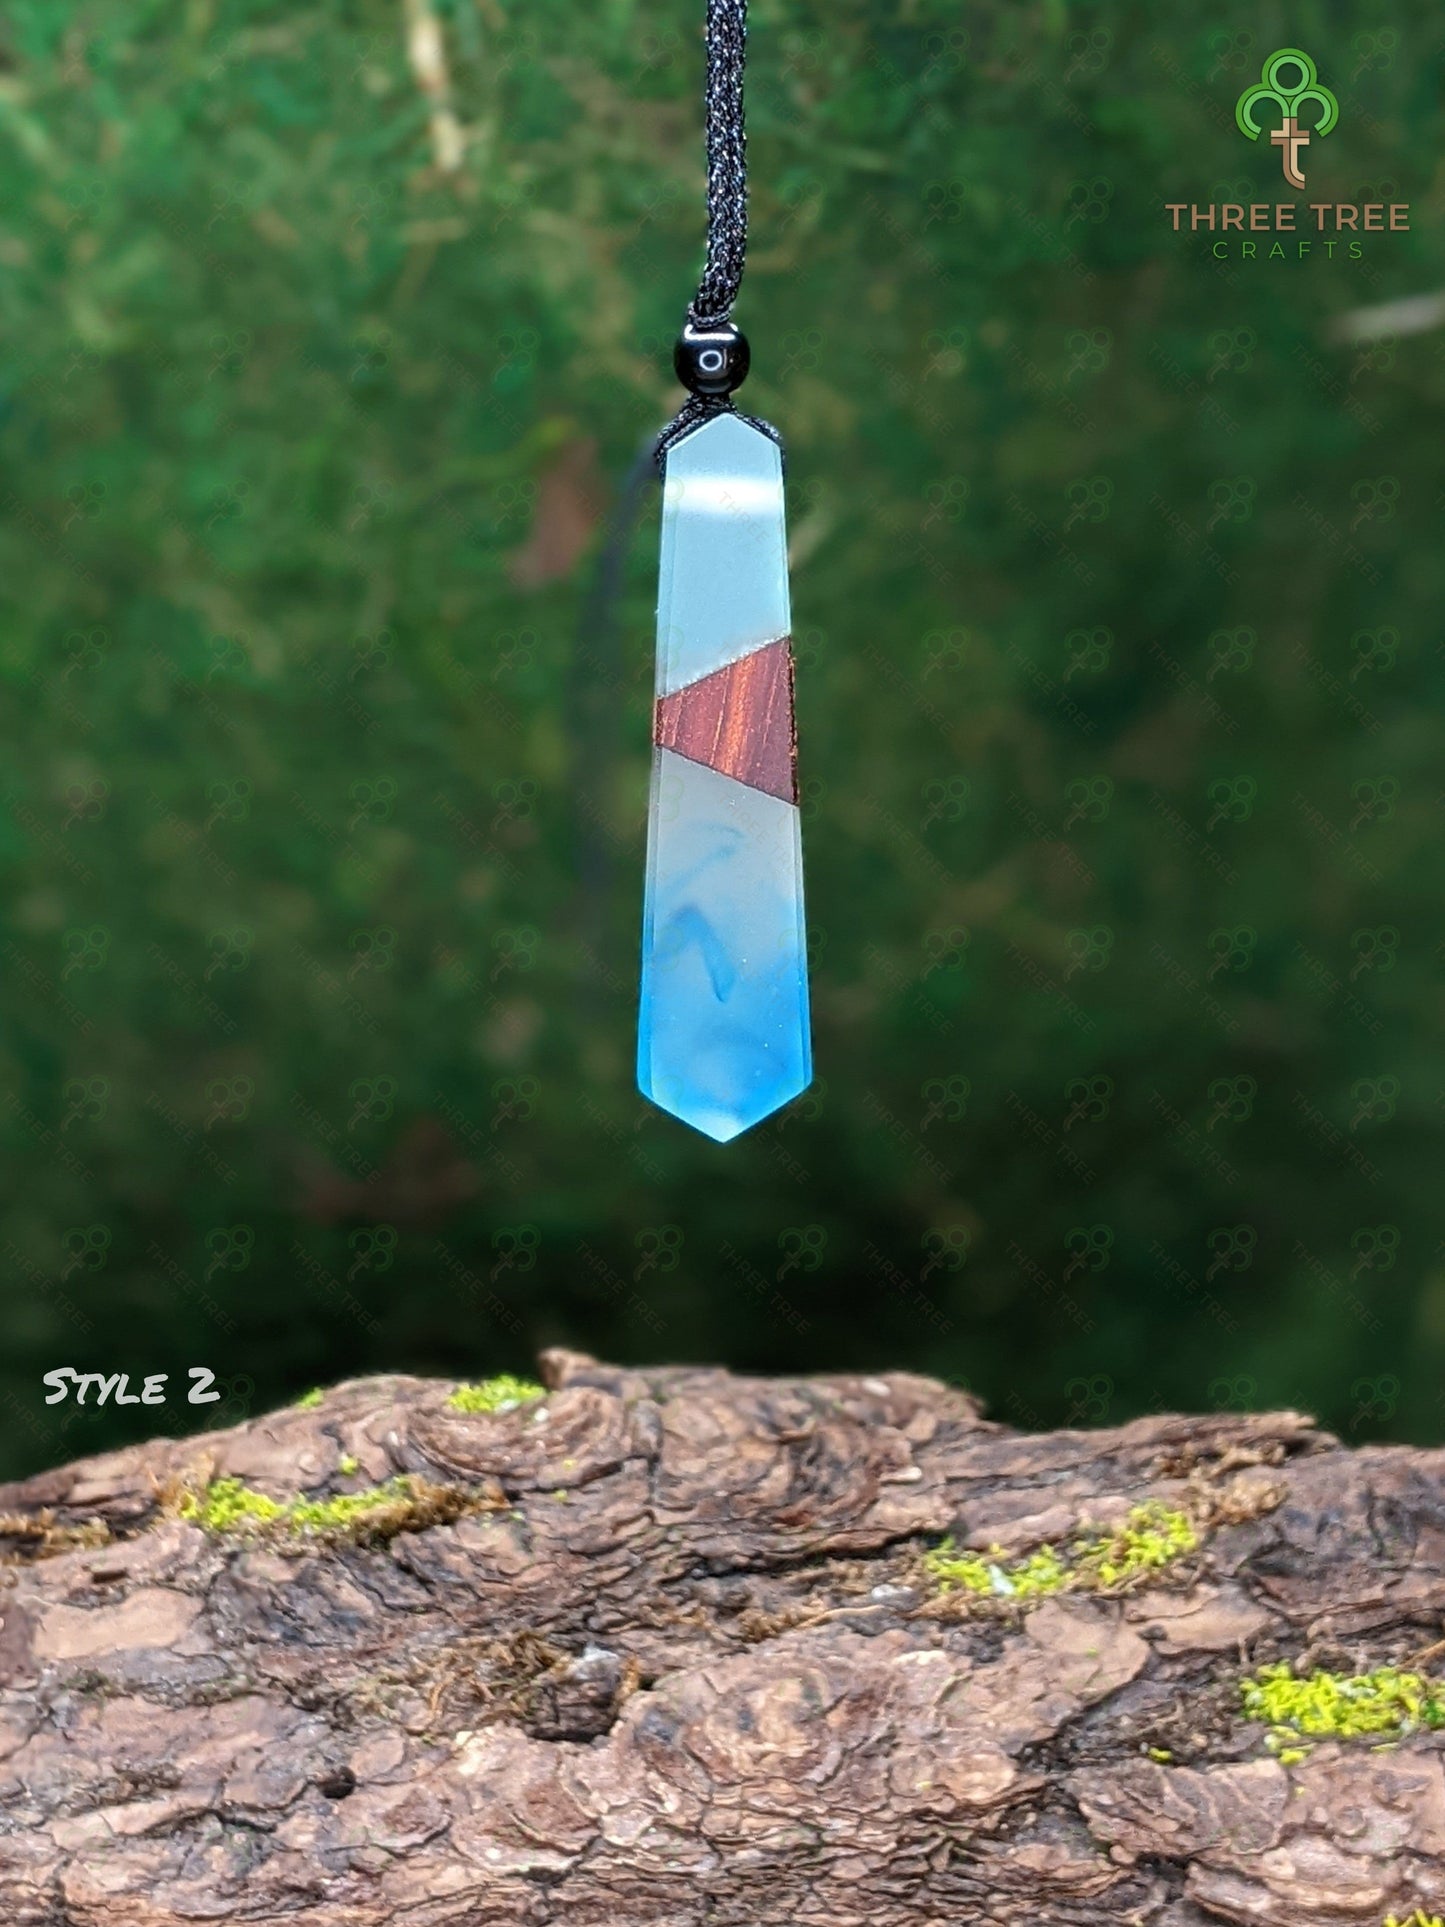 Three Tree Crafts Necklaces & Keychains Polished Wood & Resin Crystal Necklace Style 2 (Clear w Blue)